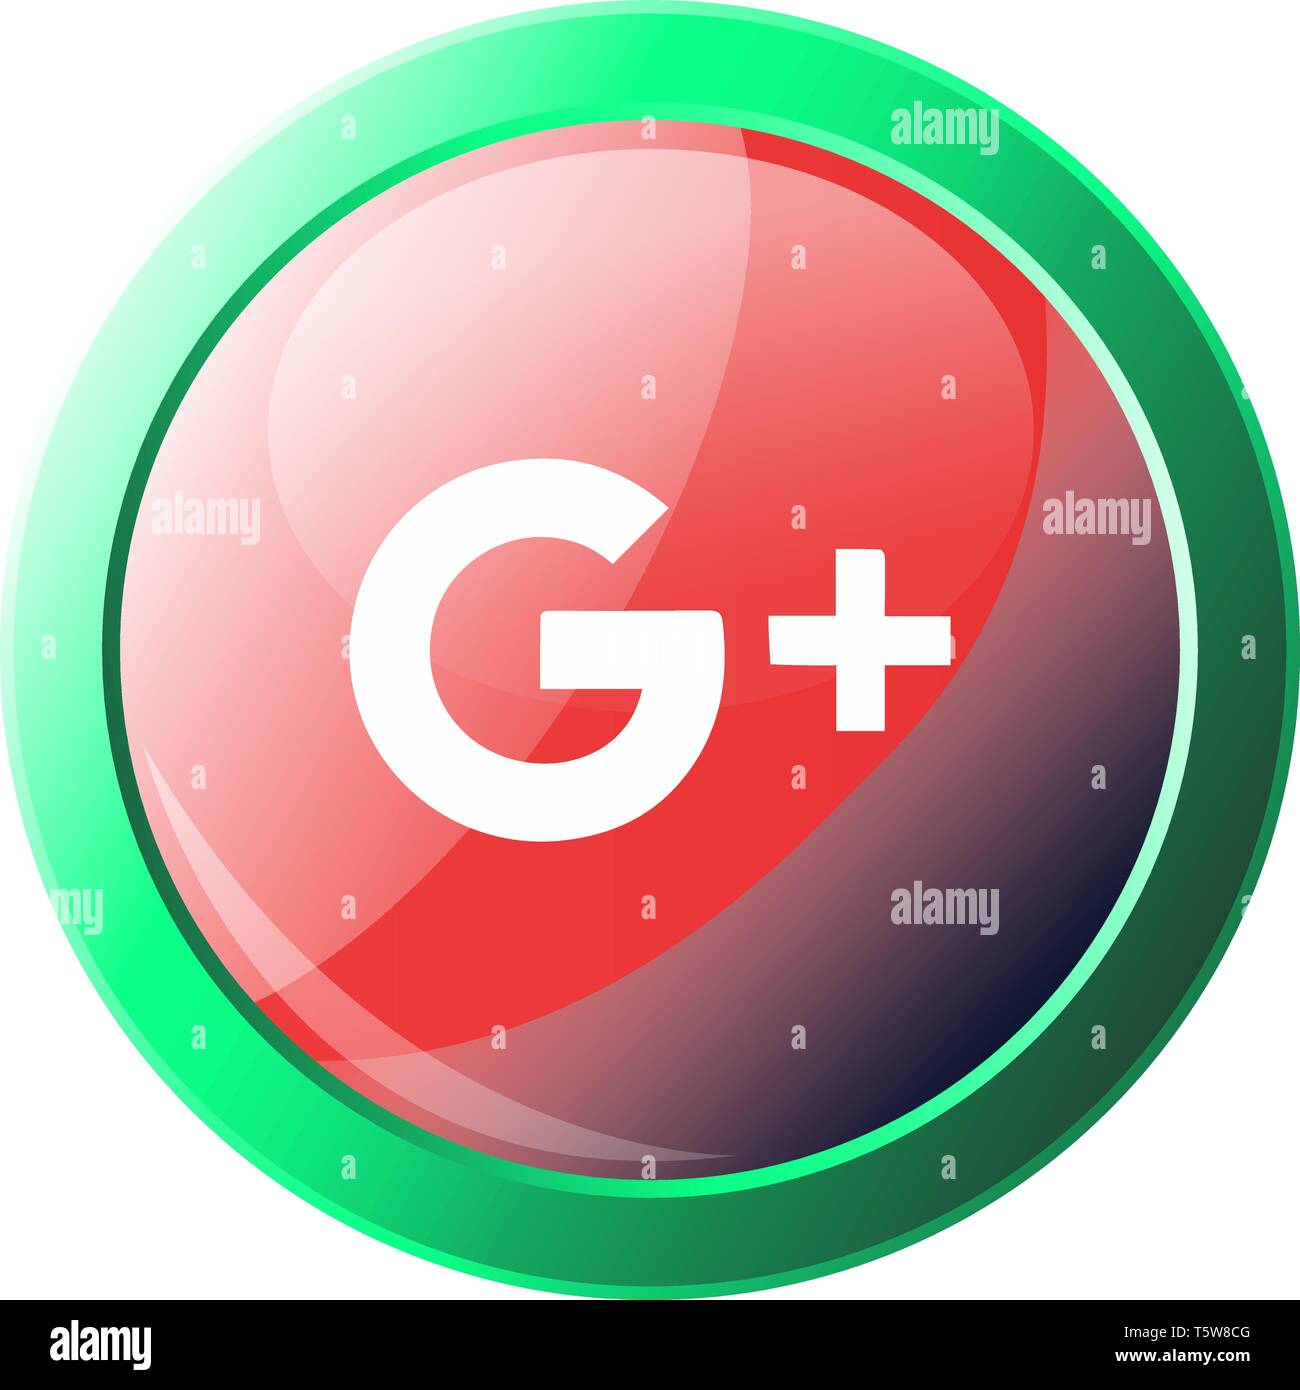 Google Plus sign inside a green round frame vector icon illustration on a white background Stock Vector